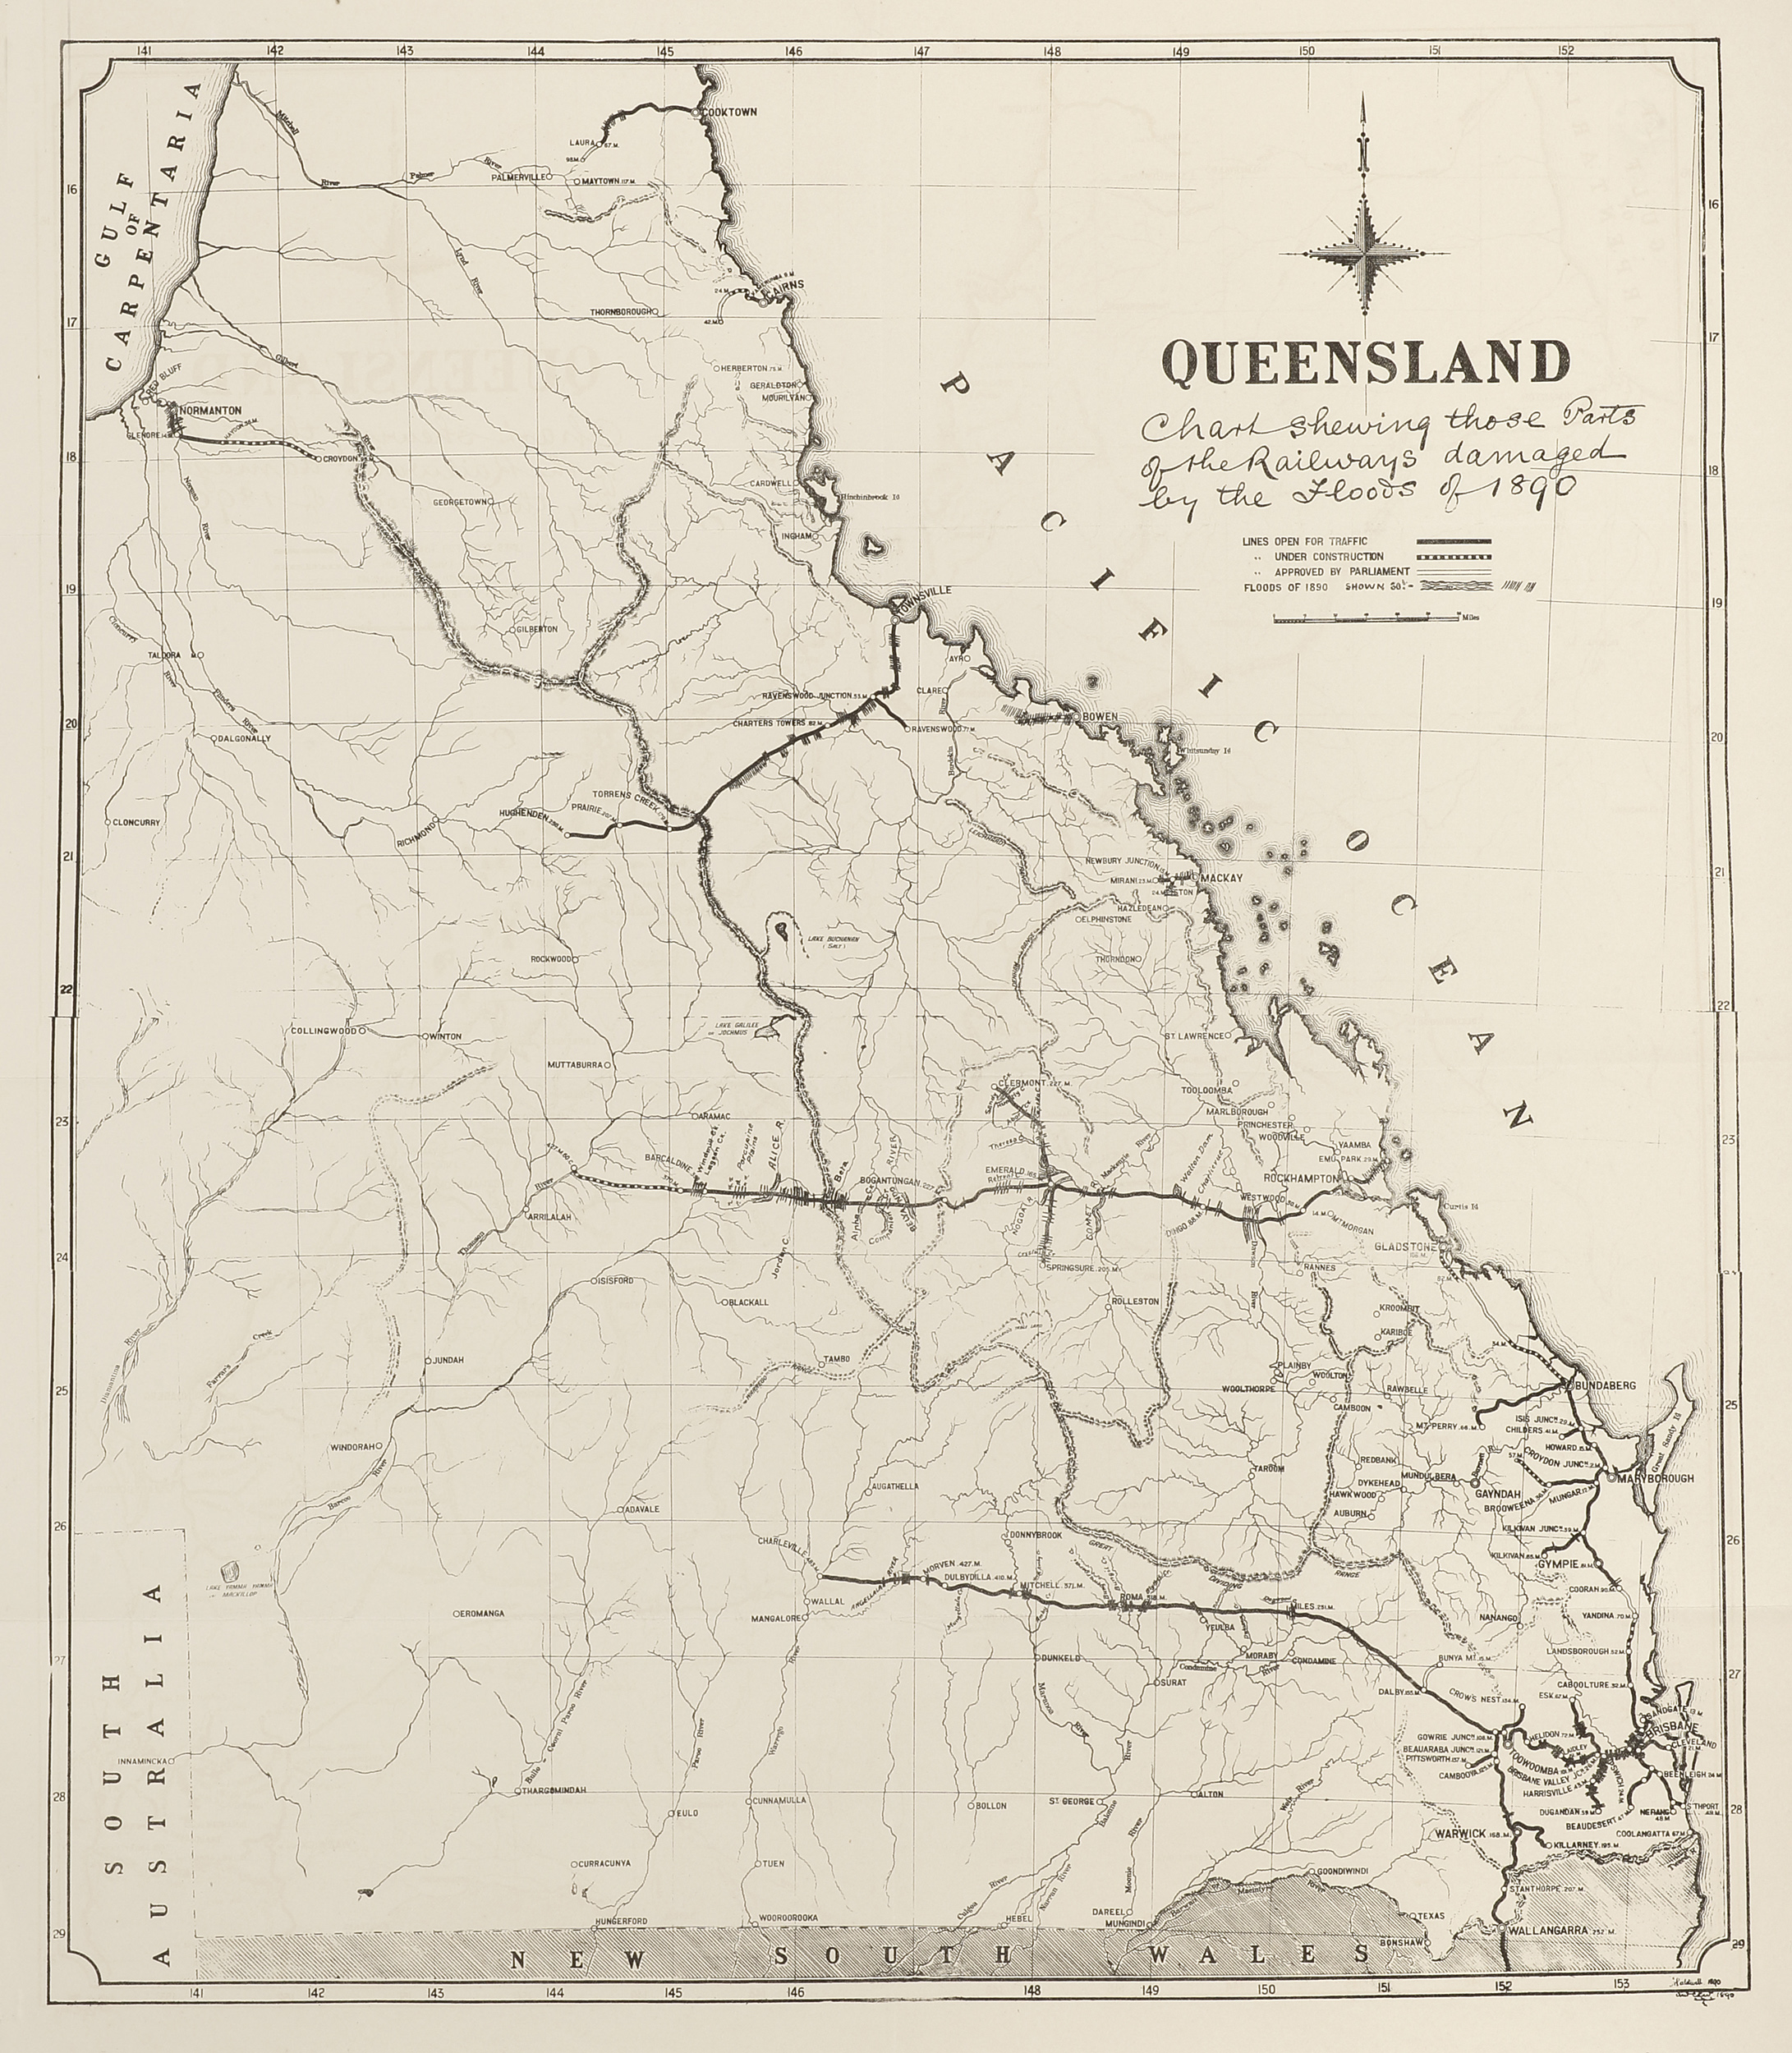 Queensland Chart Shewing those Parts of the Railways Damaged by the Floods of 1890. - Antique Map from 1890